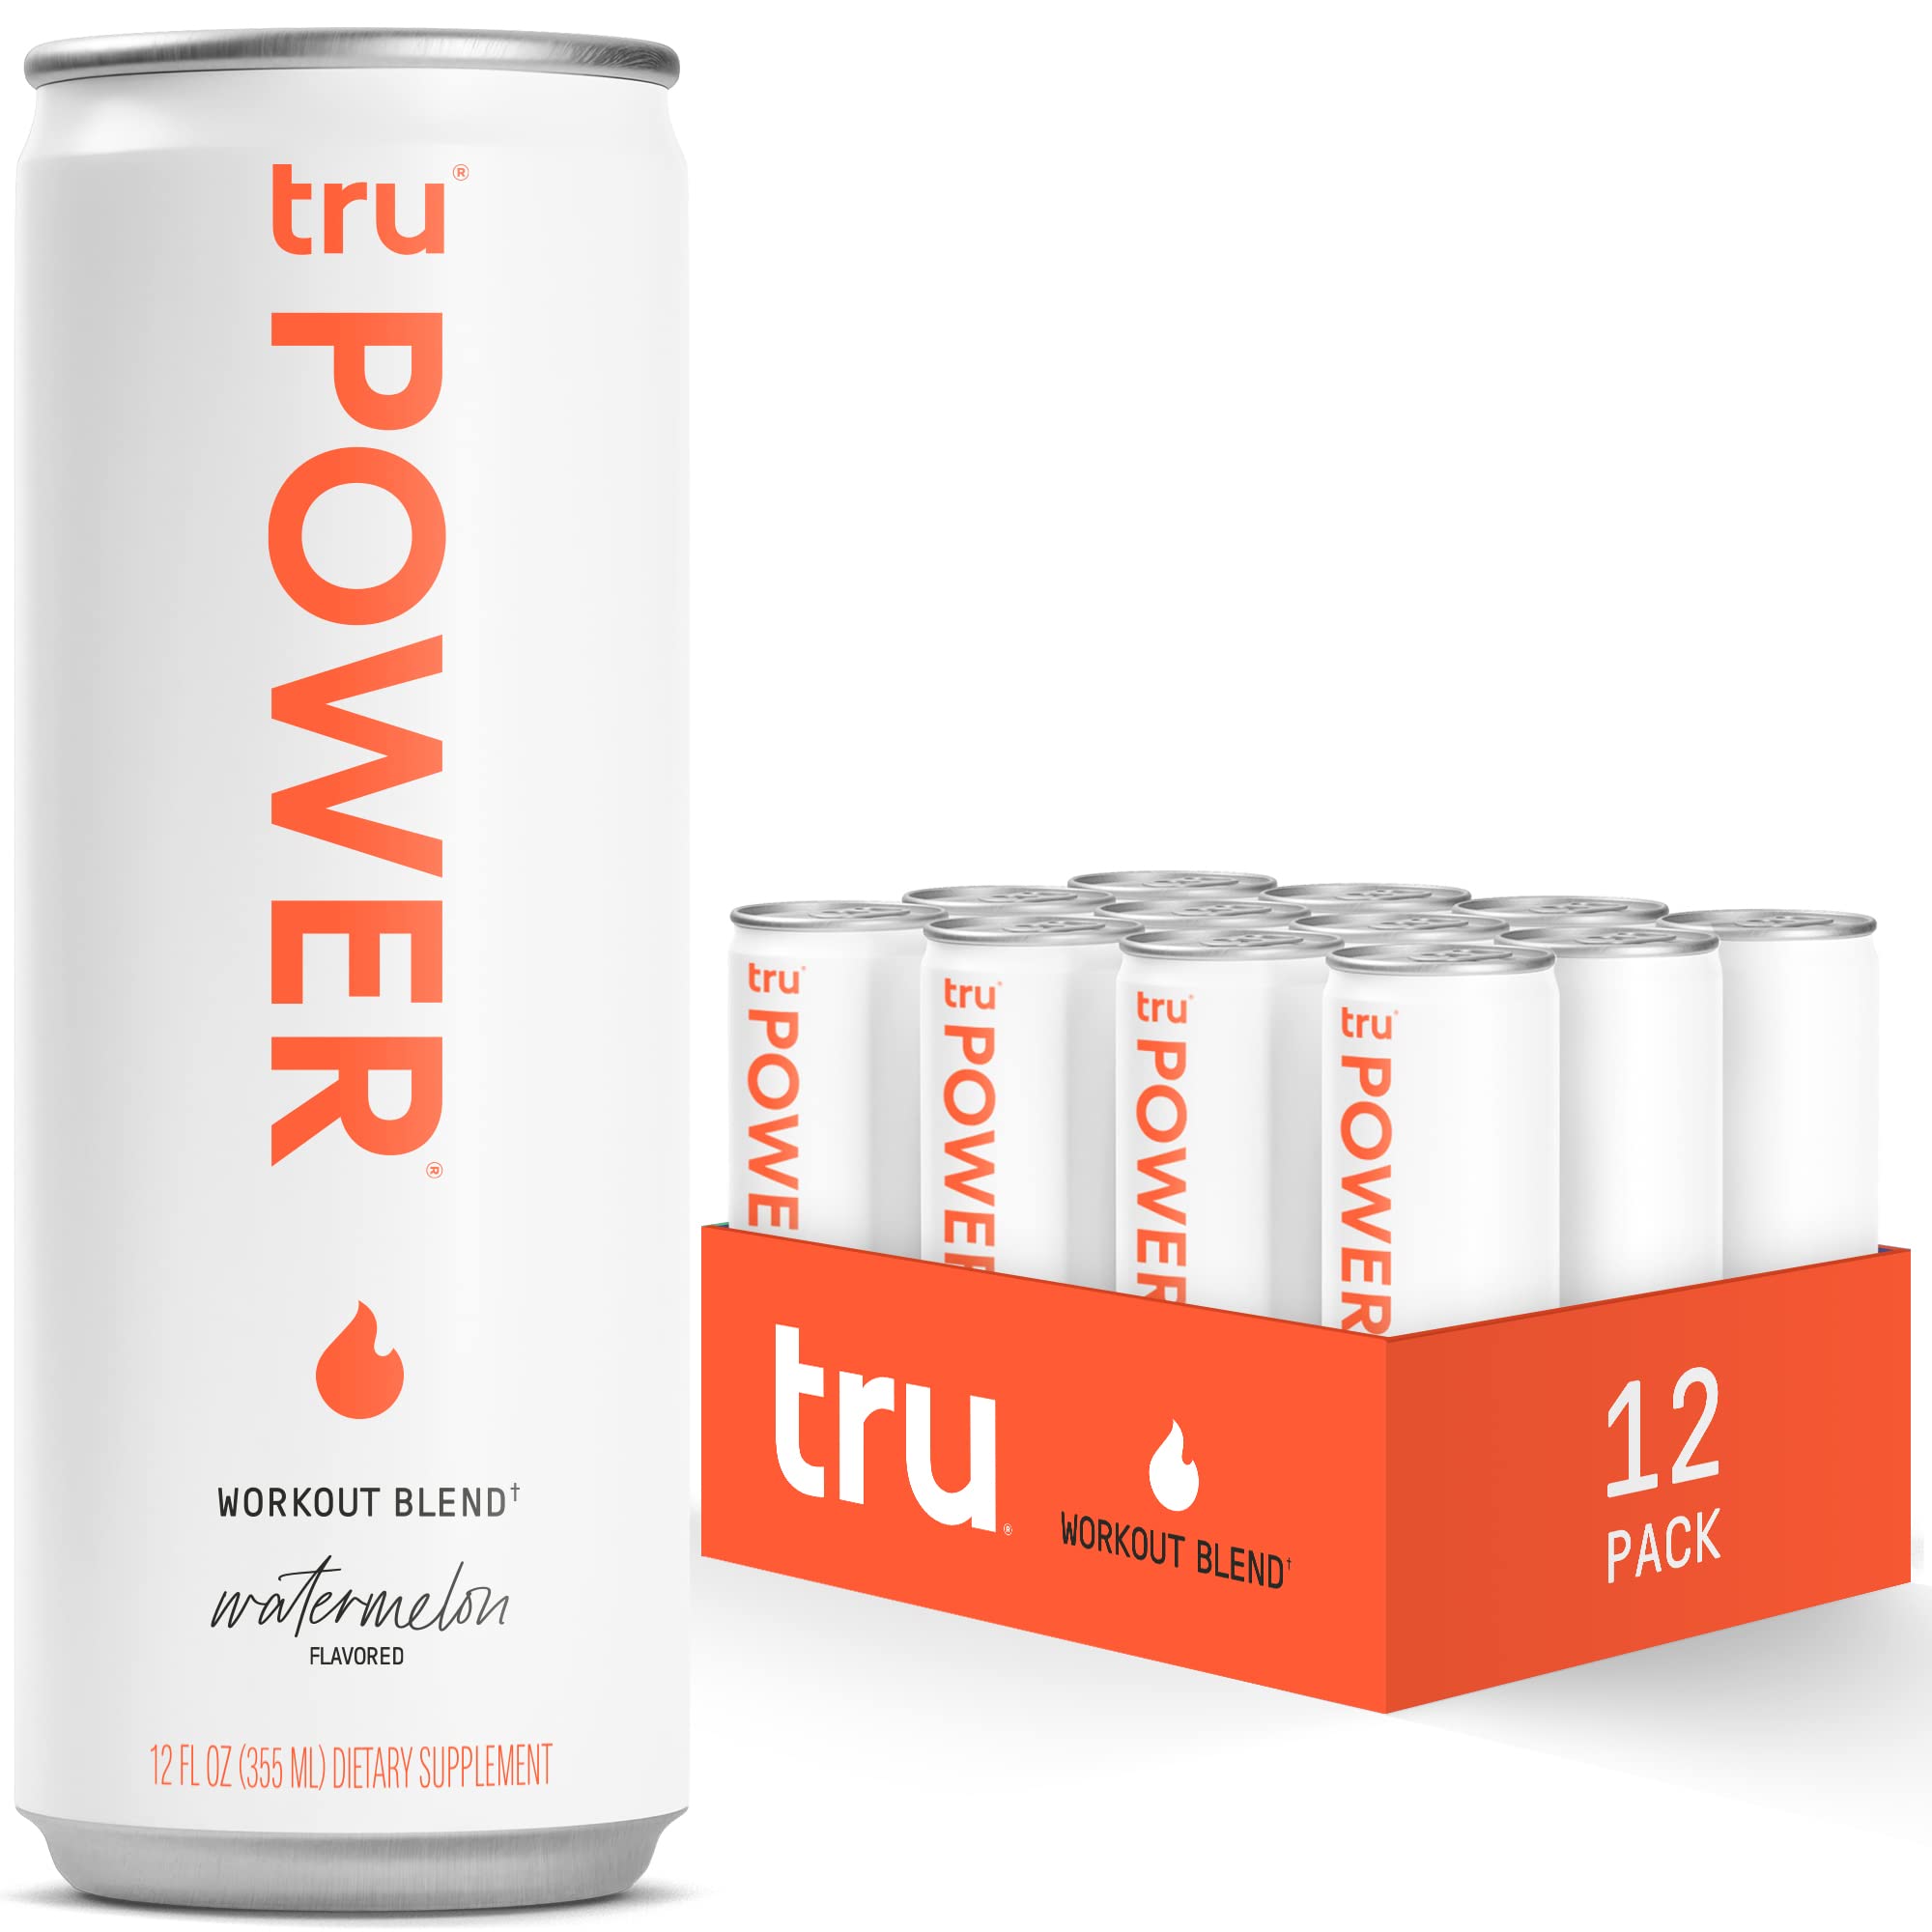 Tru Power Sparkling Water, Keto Pre Workout Energy Drinks with BCAA and Beta Alanine, Watermelon Flavored, 12 oz (Pack of 12)